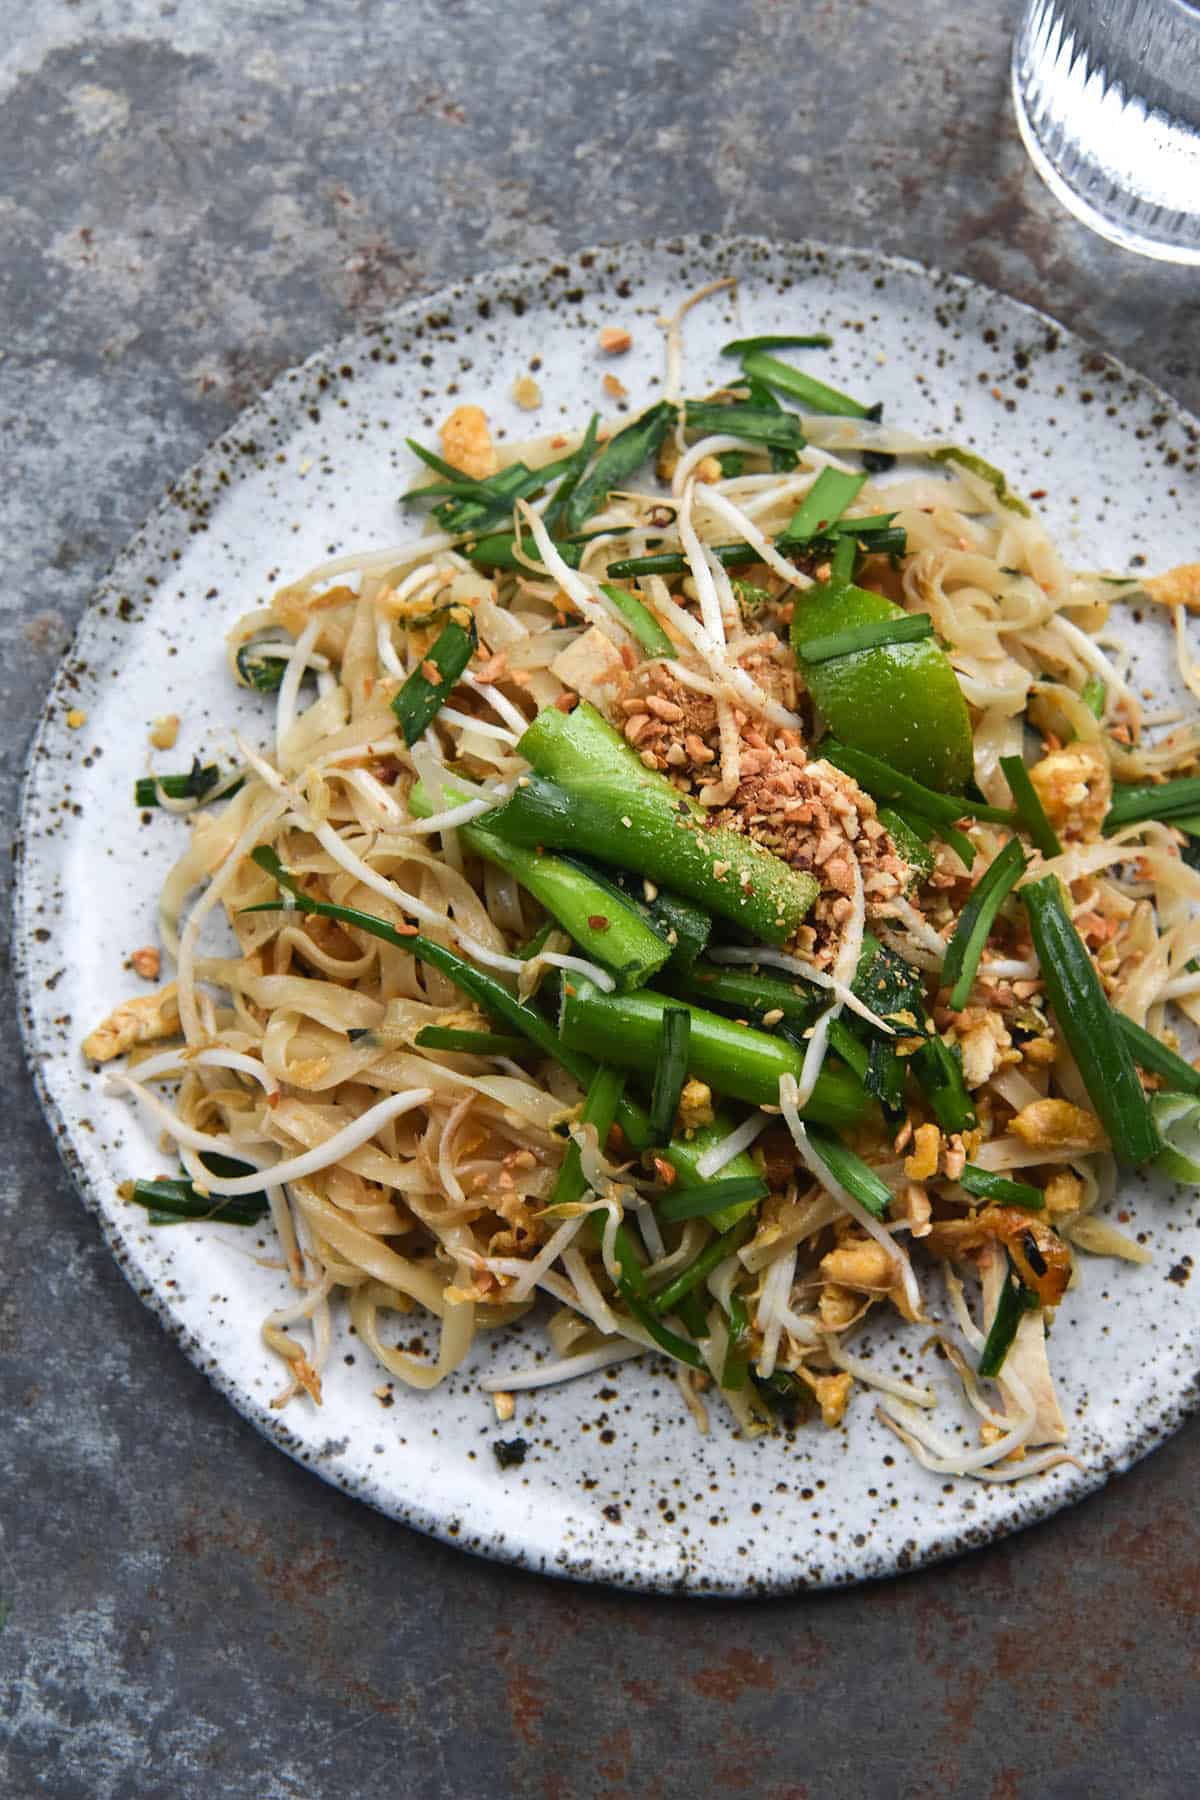 An aerial view of a white speckled plate of FODMAP friendly vegetarian or vegan Pad Thai. The pad Thai is casually arranged on the plate and topped with spring onion greens, toasted peanuts and beansprouts. The plate sits atop a denim blue mottled metal backdrop